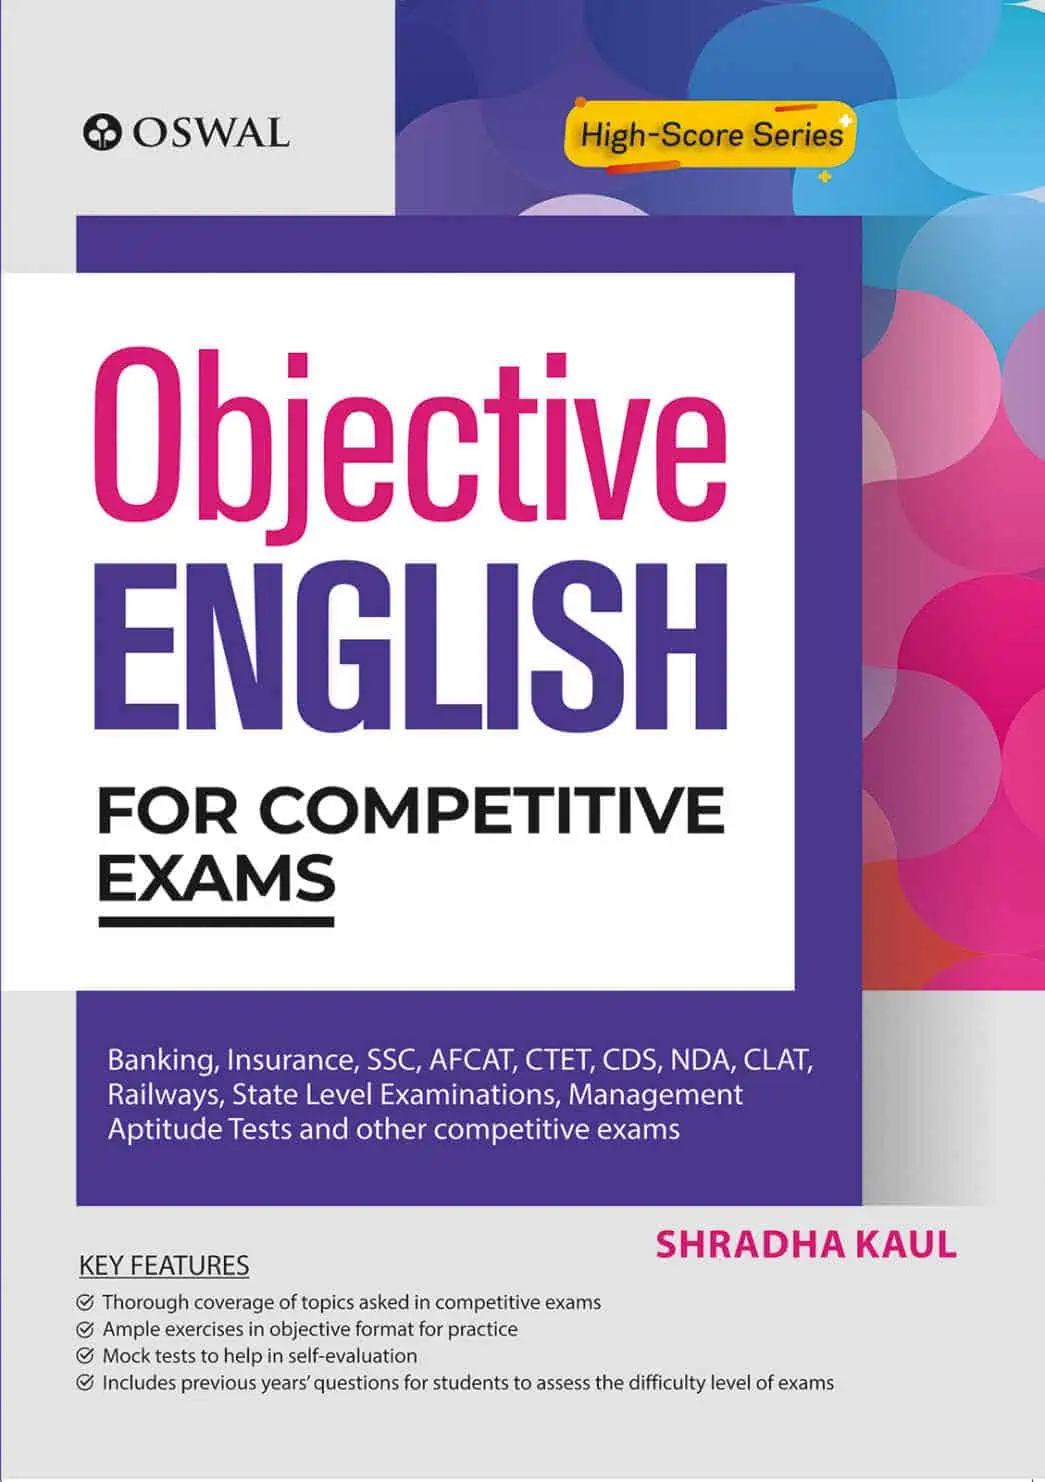 Oswal A Comprehensive Guide on General English - Neelam Malkani